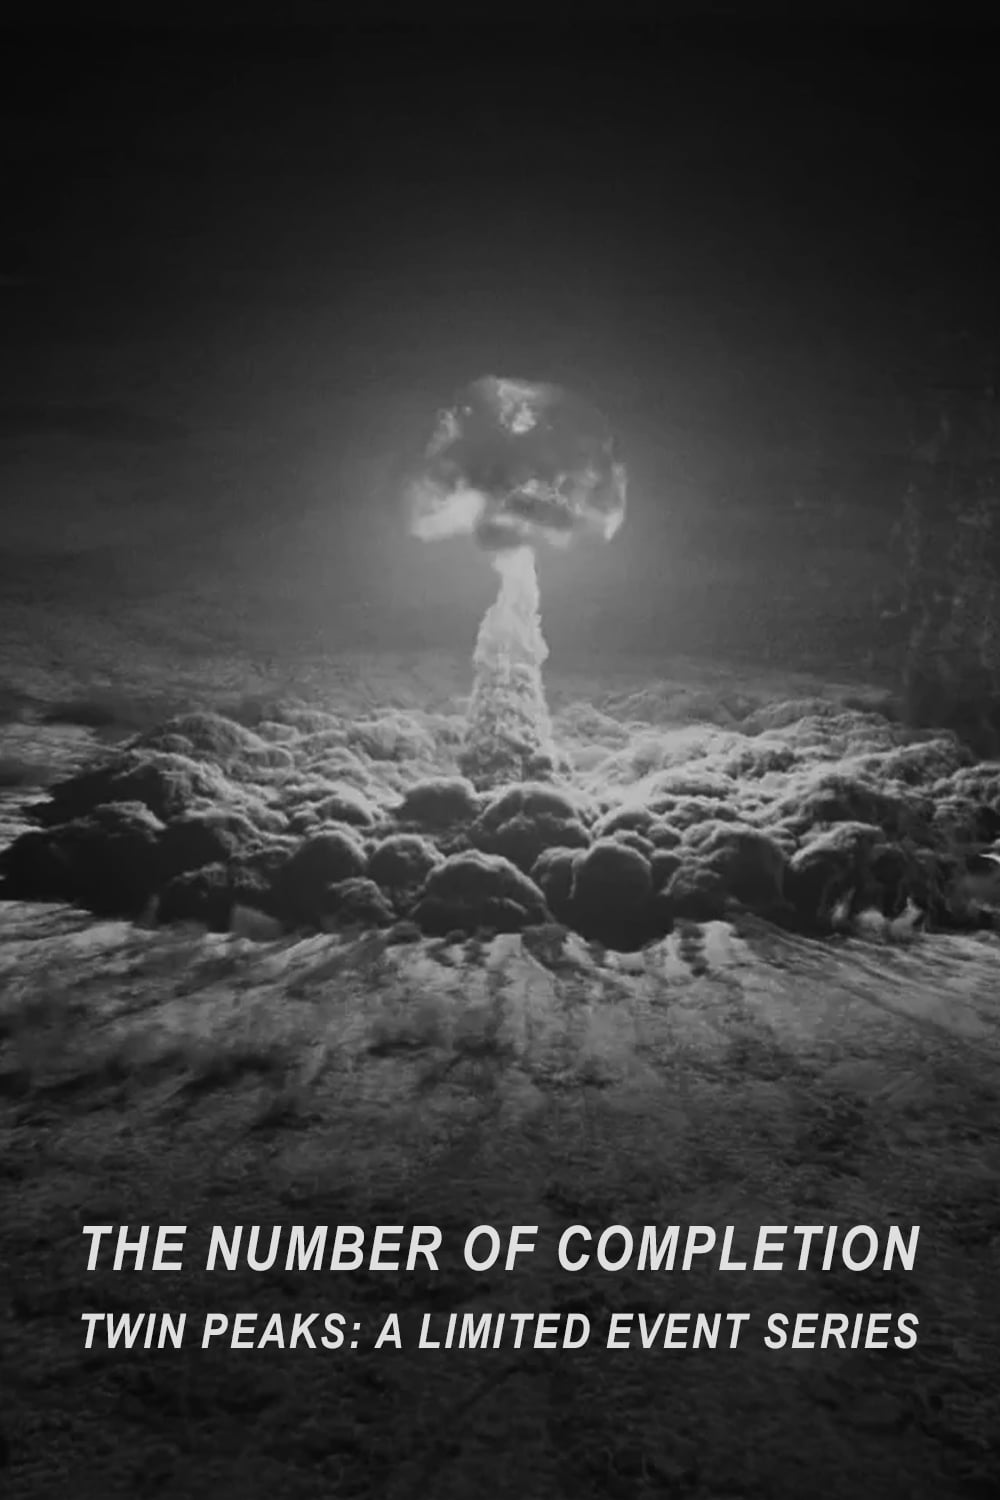 The Number of Completion (2017)